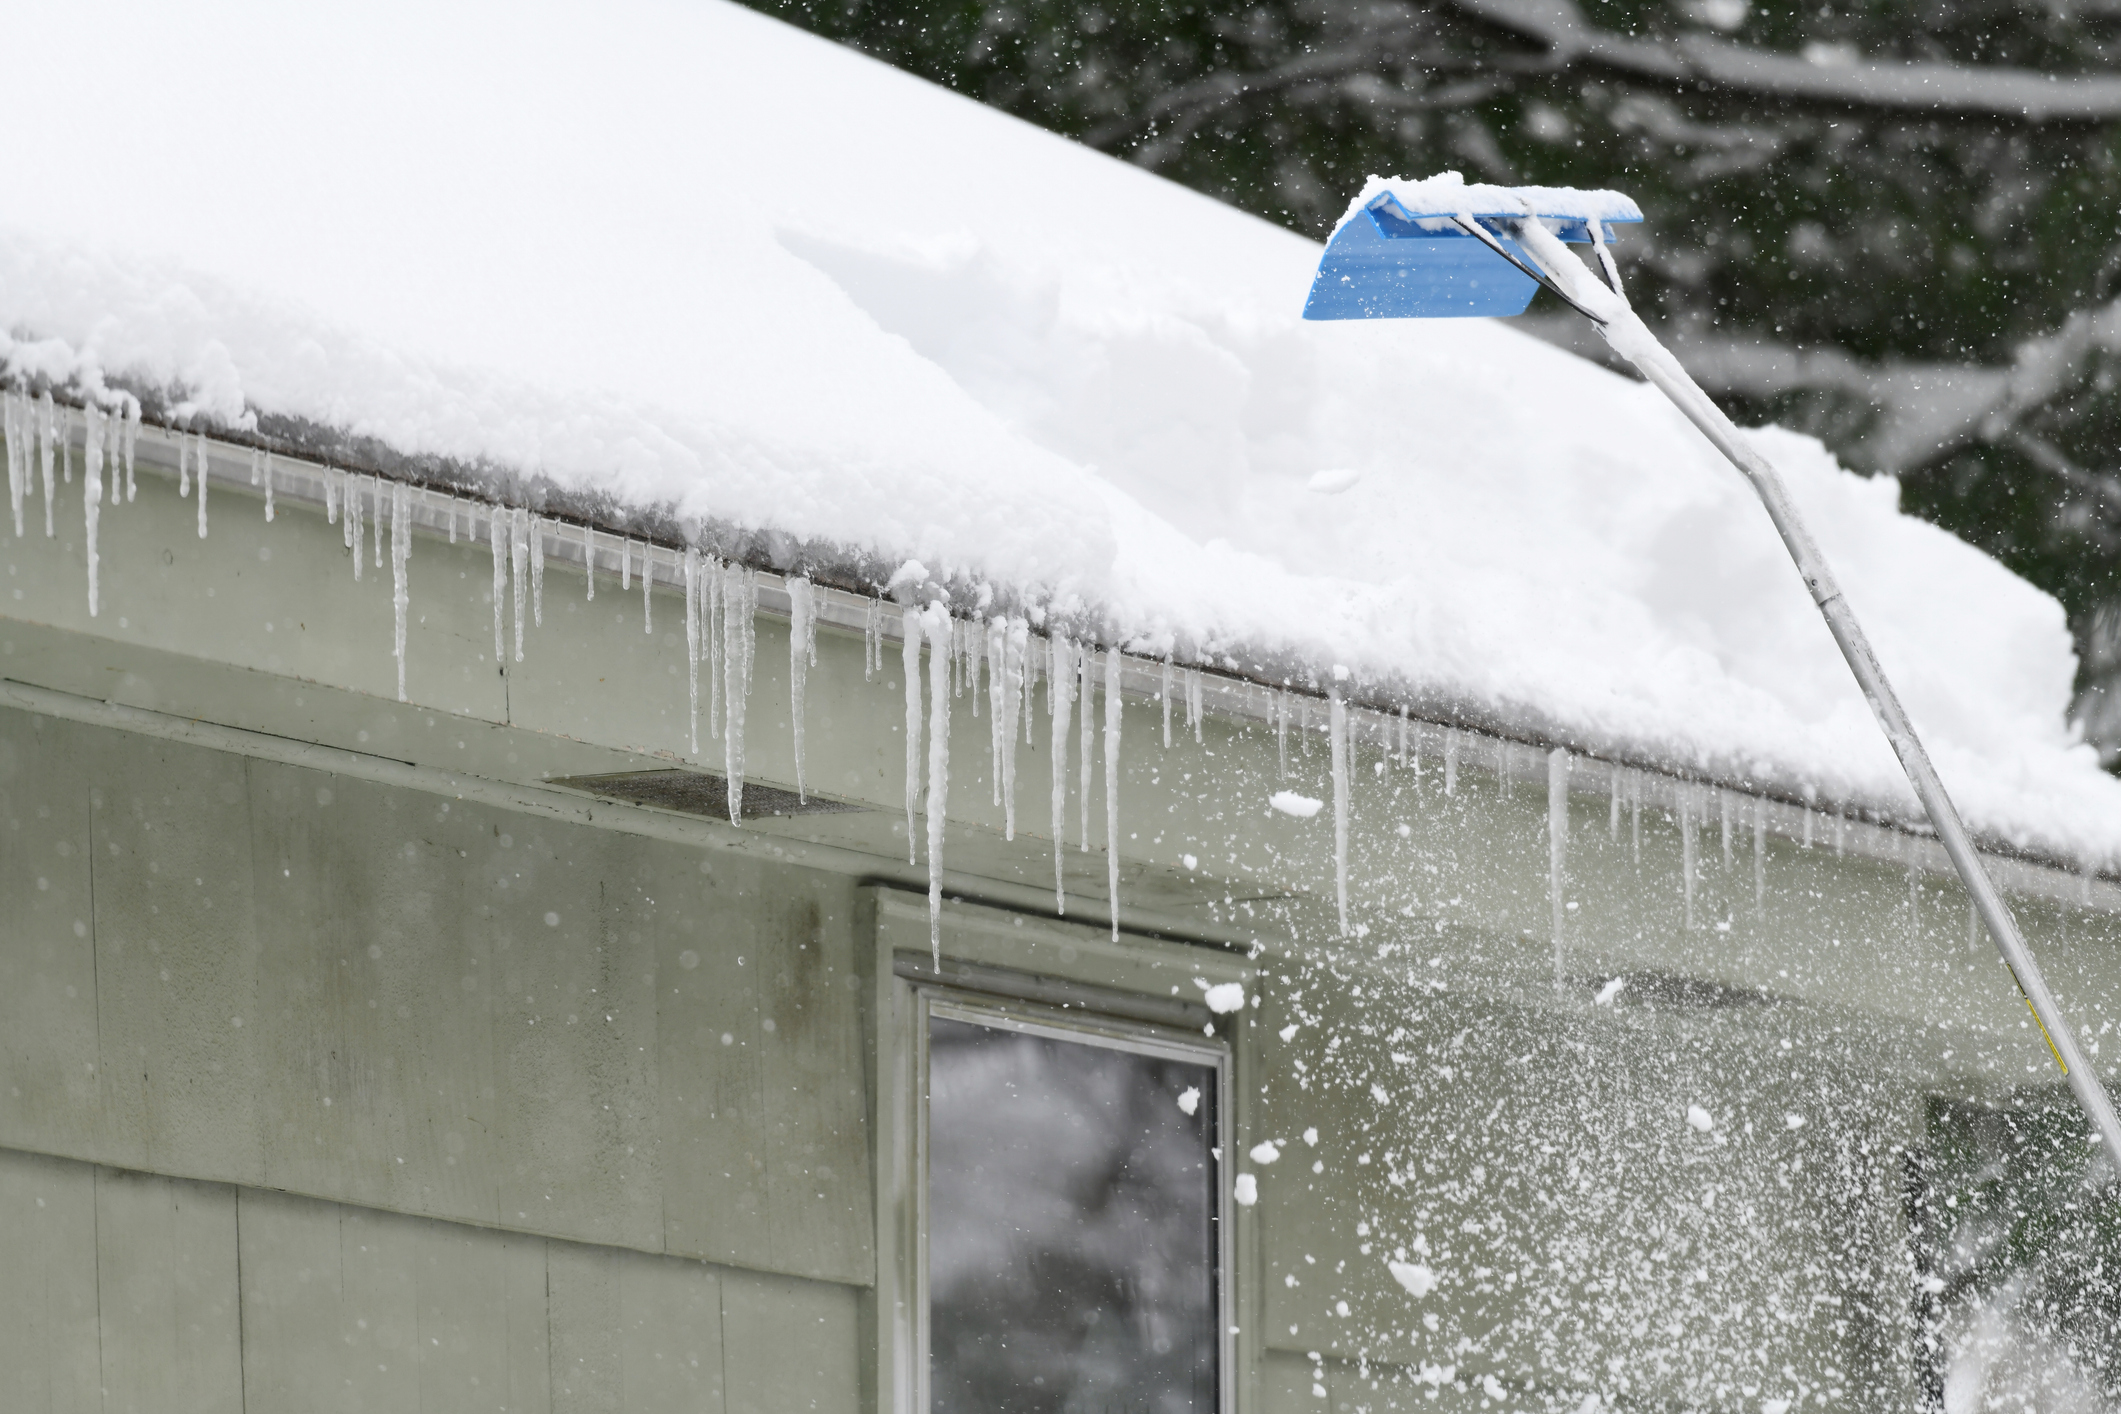 Roof rake removes snow from home roof